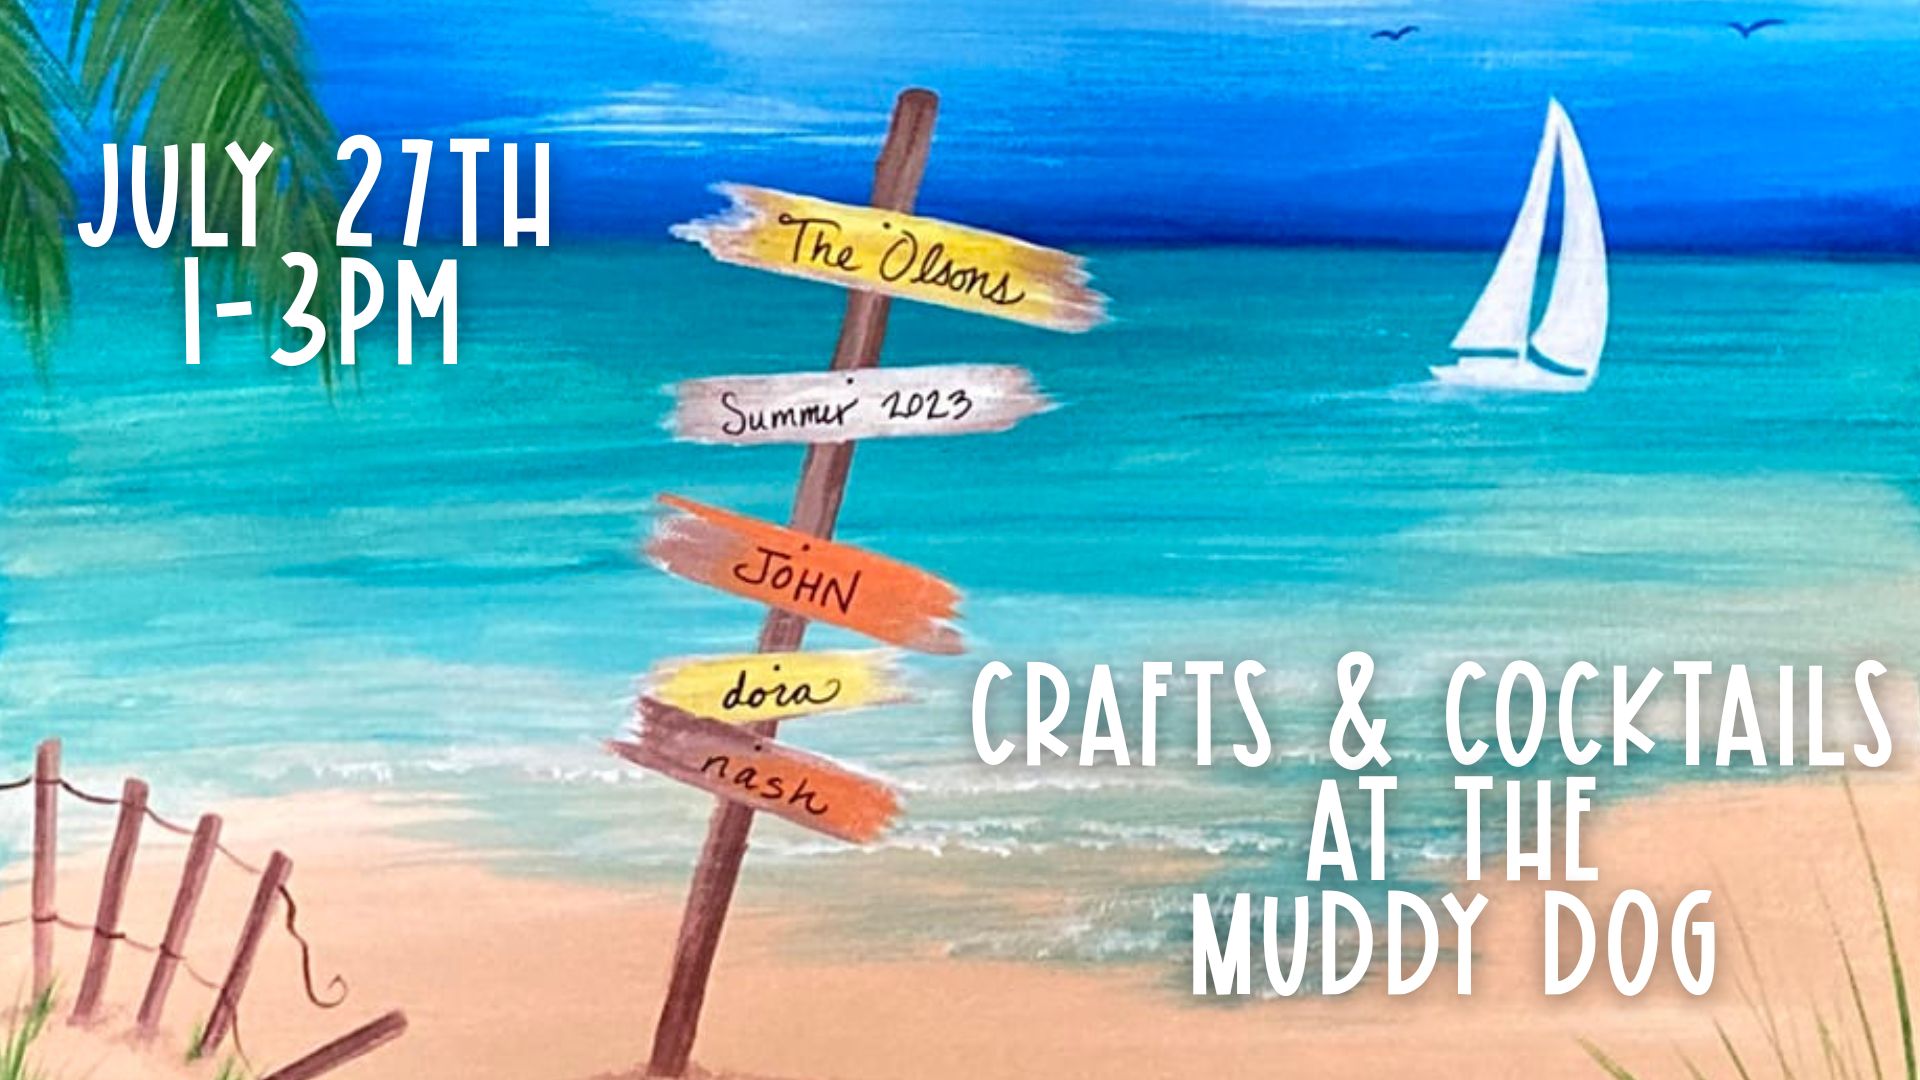 Crafts and Cocktails July 27th at the Muddy Dog